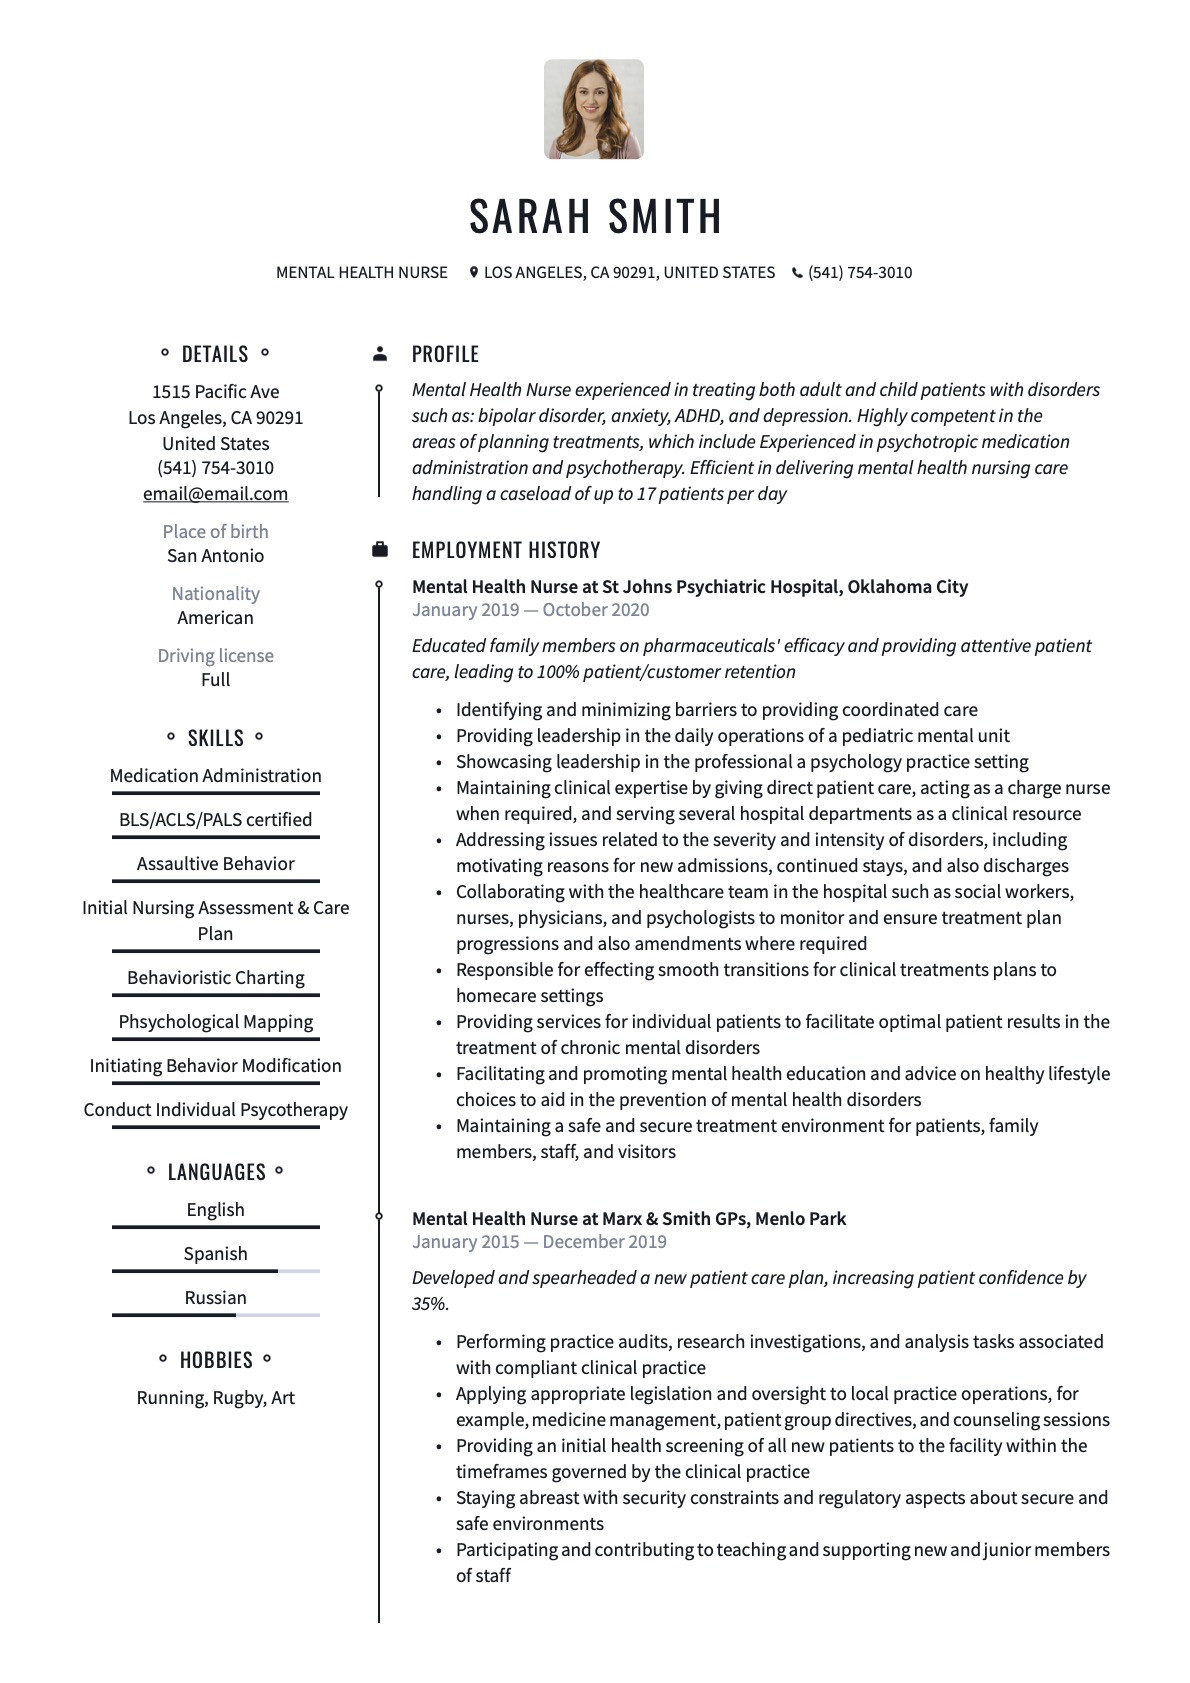 Resume Sample for Working withfor Behaviorial Adults and Youth Mental Health Nurse Resume & Guide  20 Free Templates